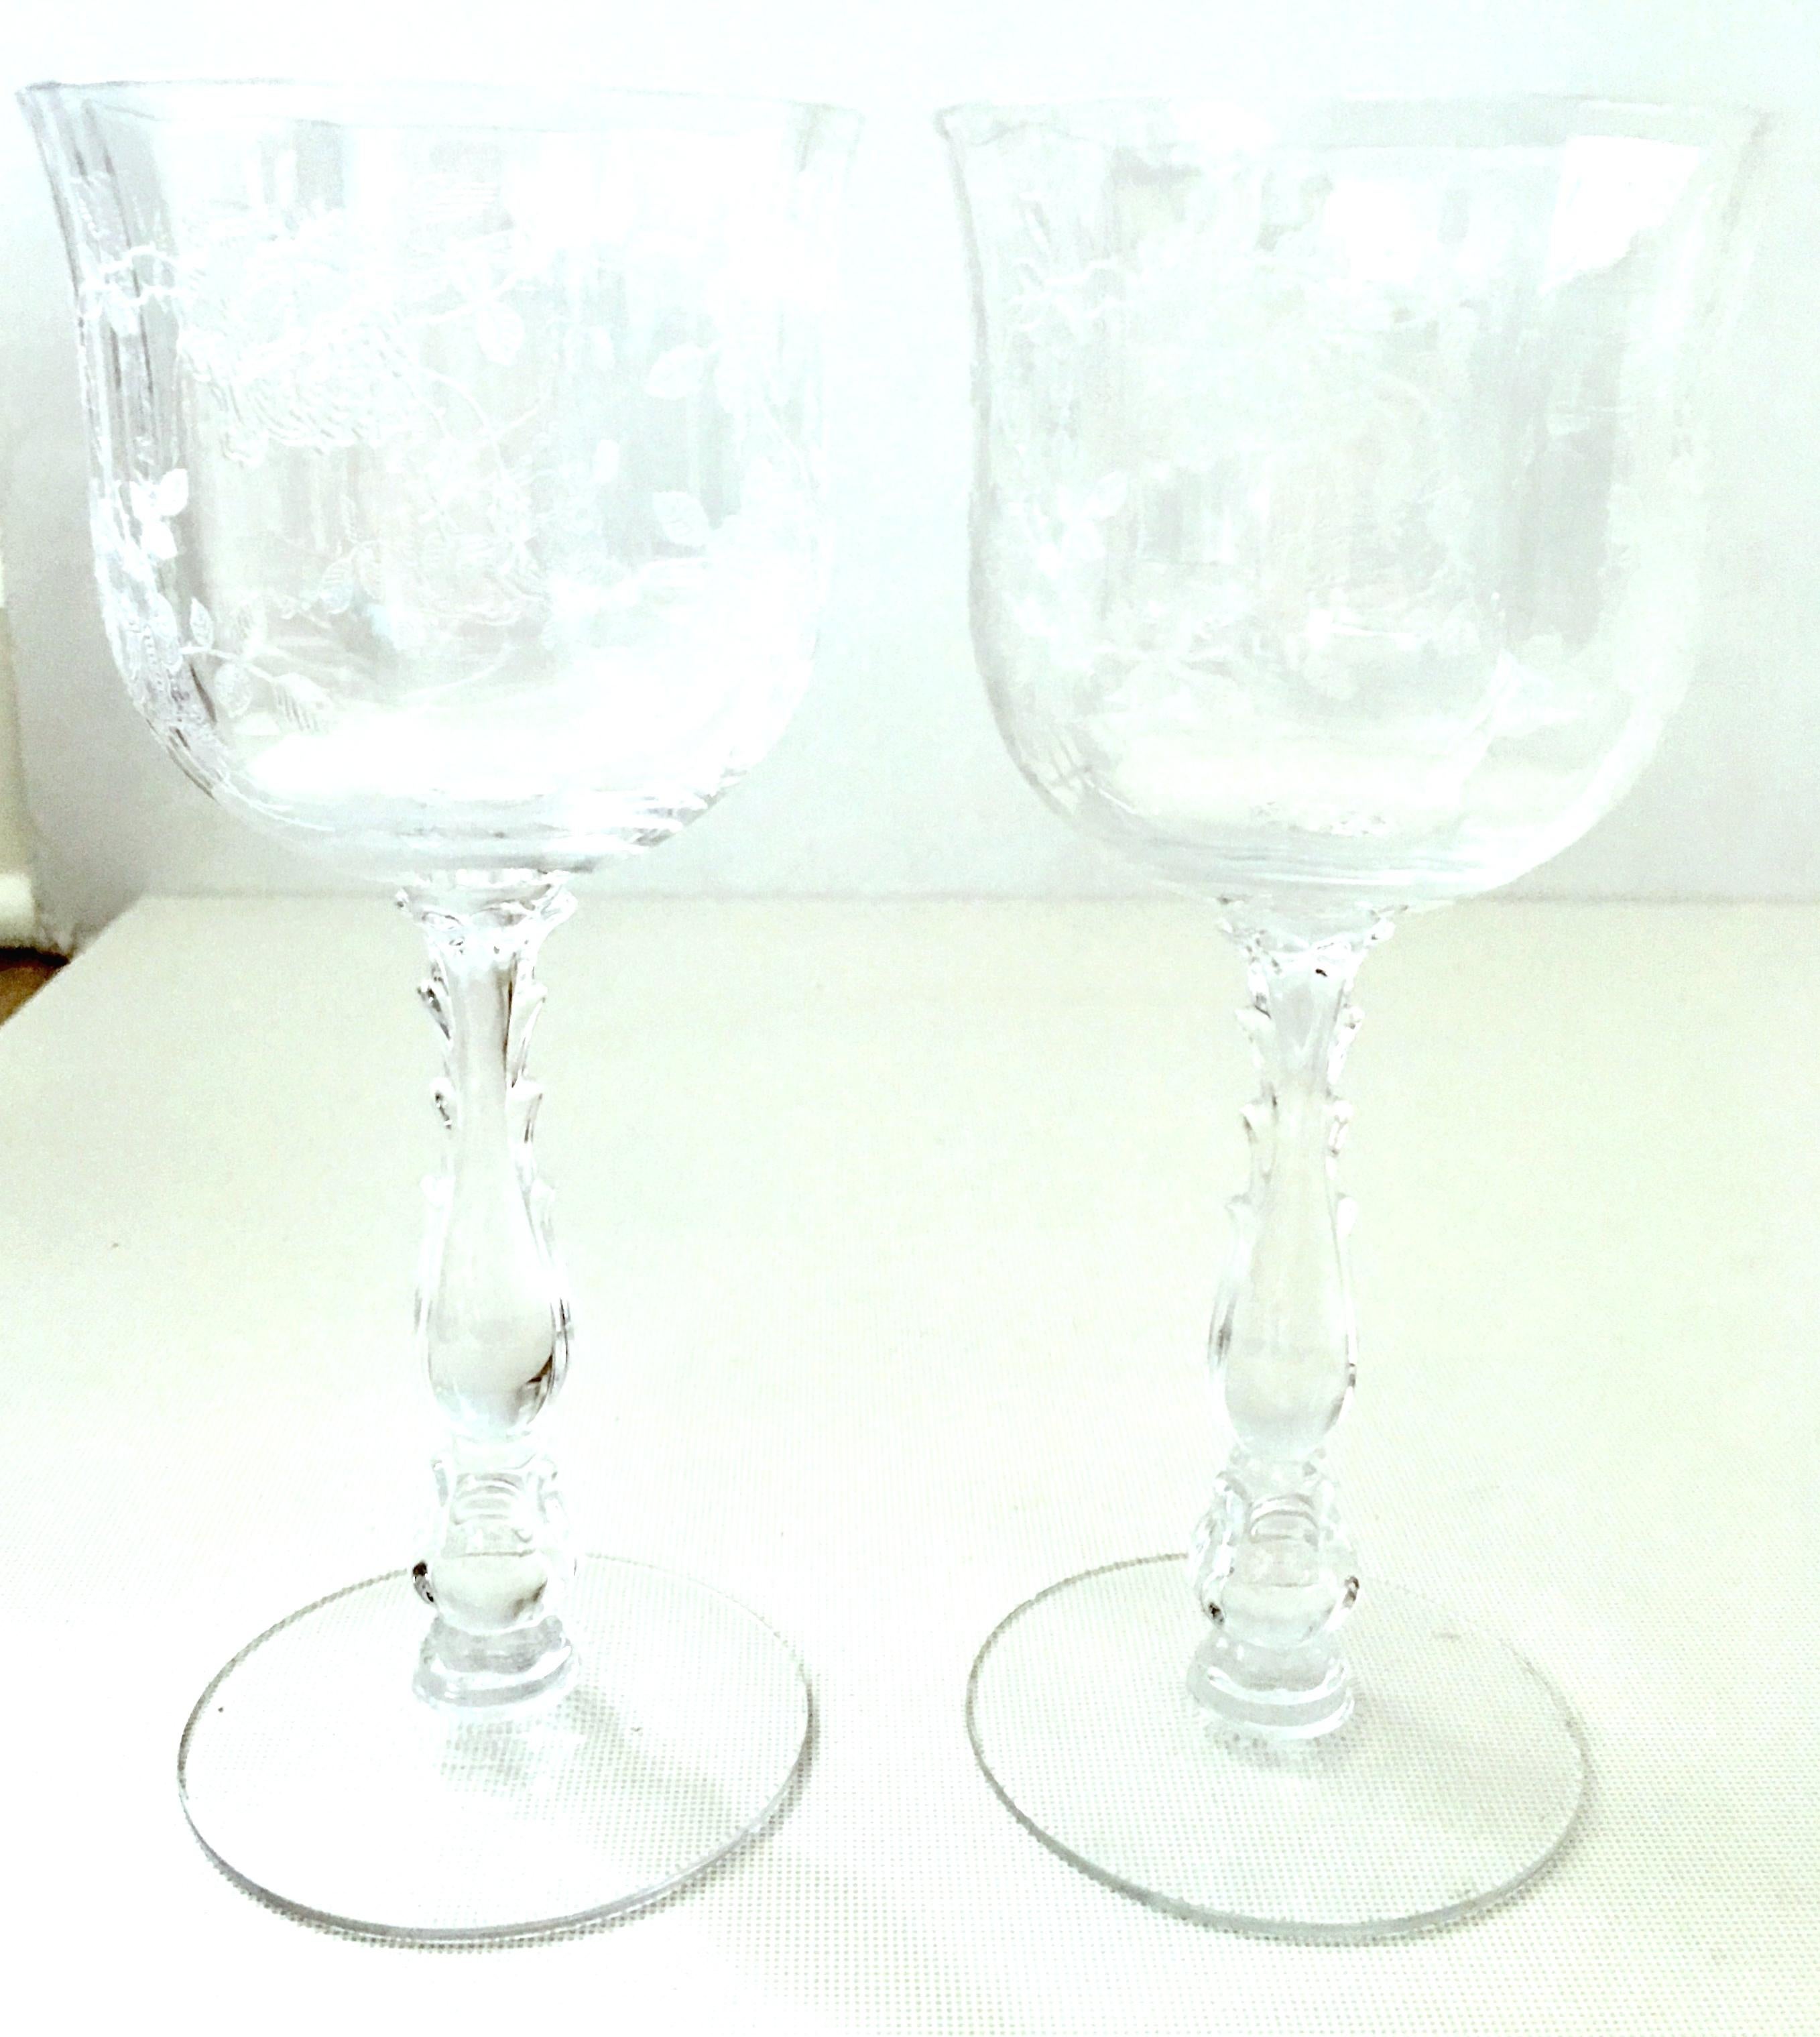 Mid-20th century American etched crystal stem glasses set of seven pieces. Pattern features and optic shape with rose and vine pattern and cut stem.